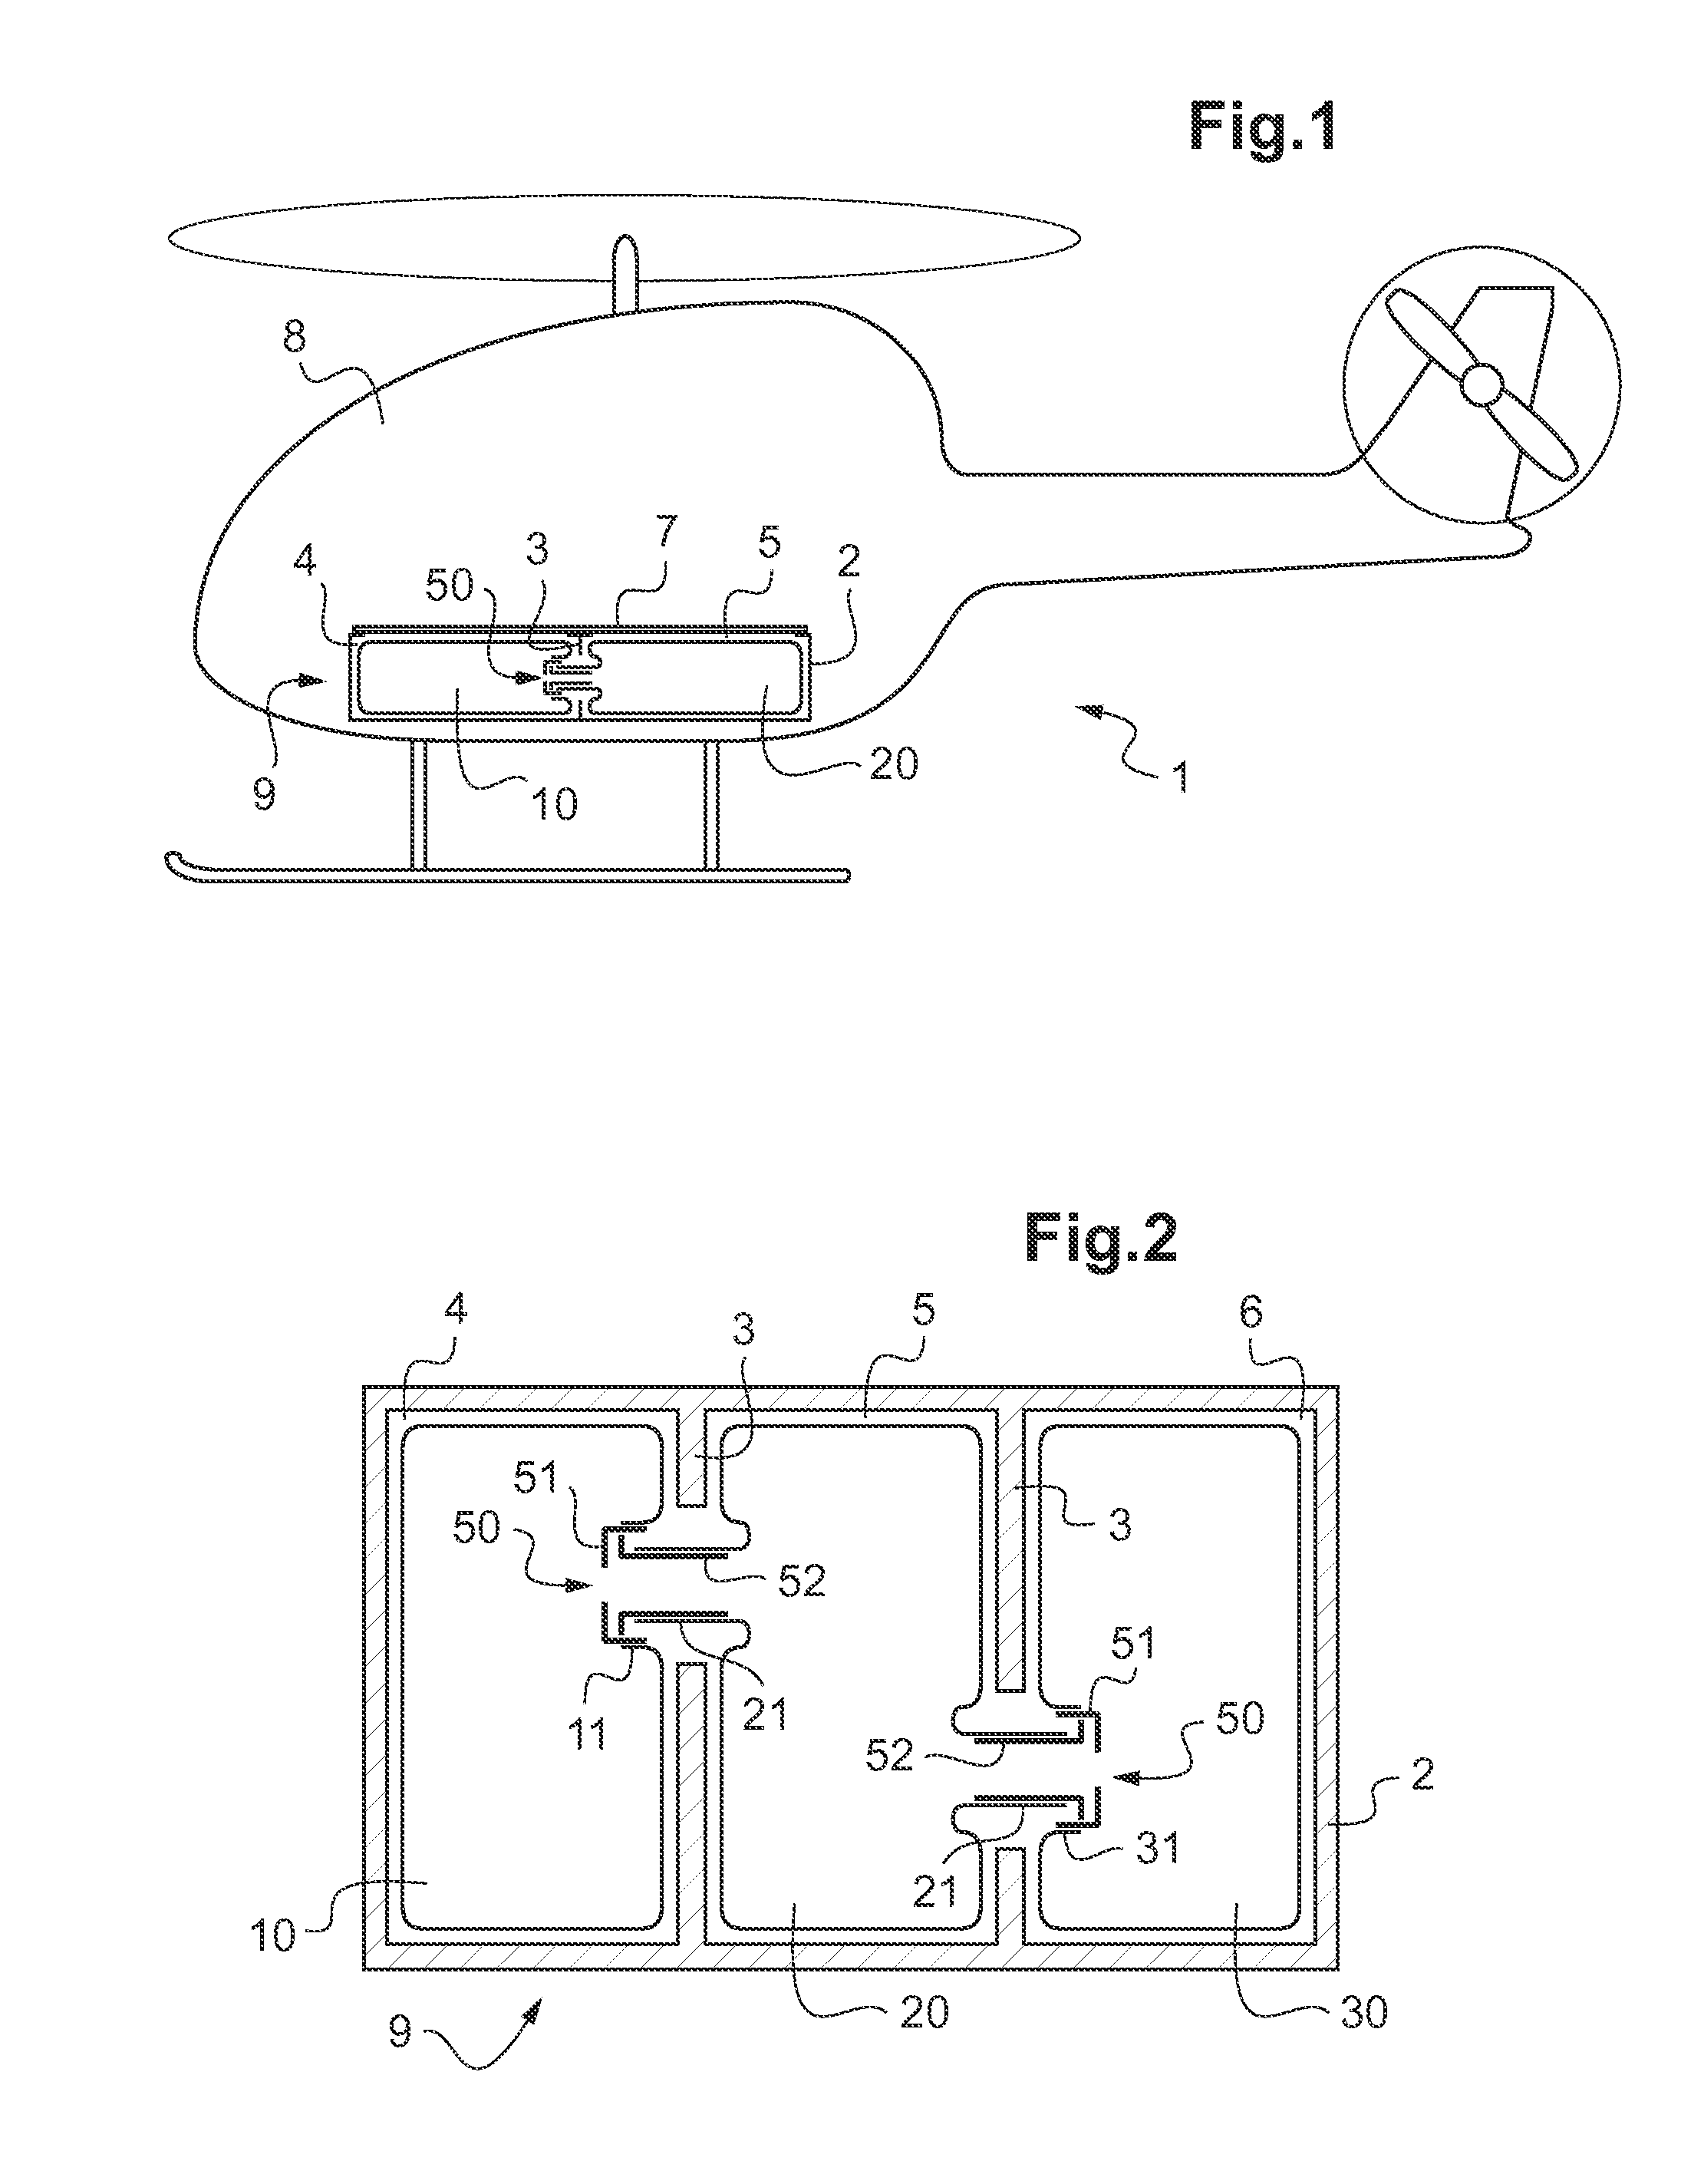 Removable coupling device for coupling together two flexible pipes